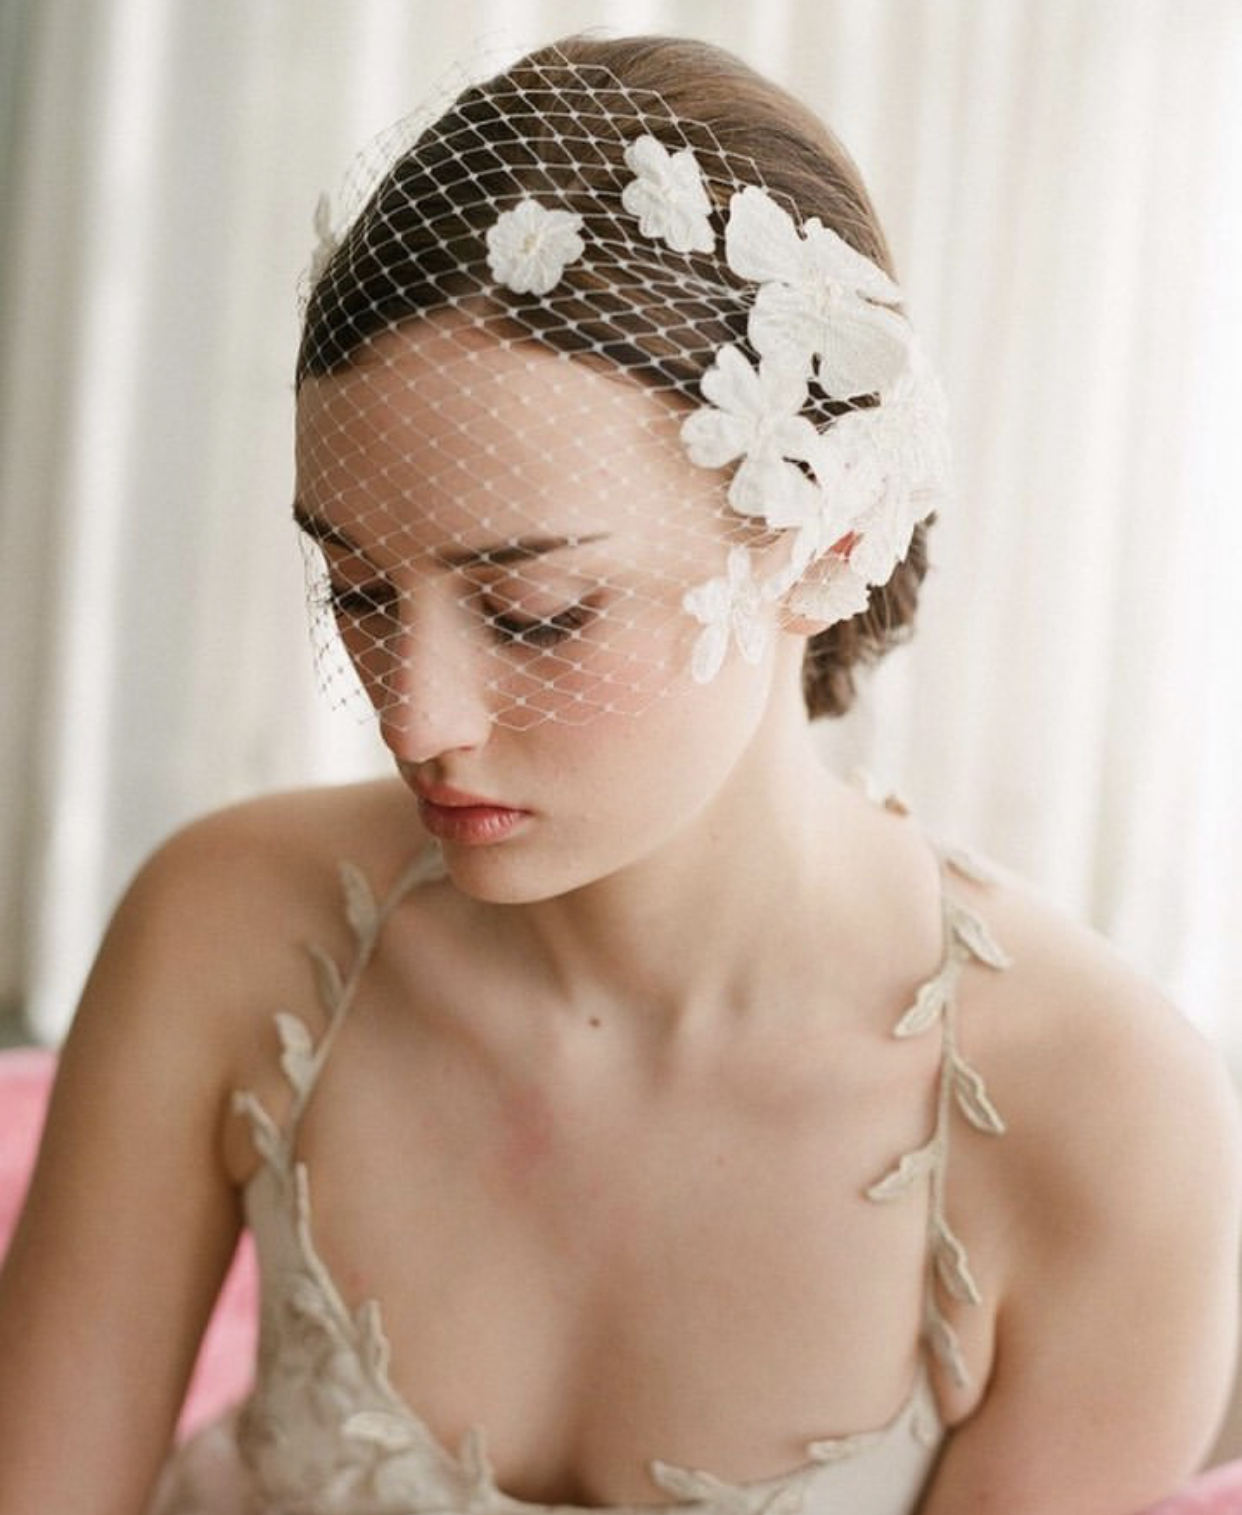 Birdcage & Blusher Veils that will make the Bride Outstanding